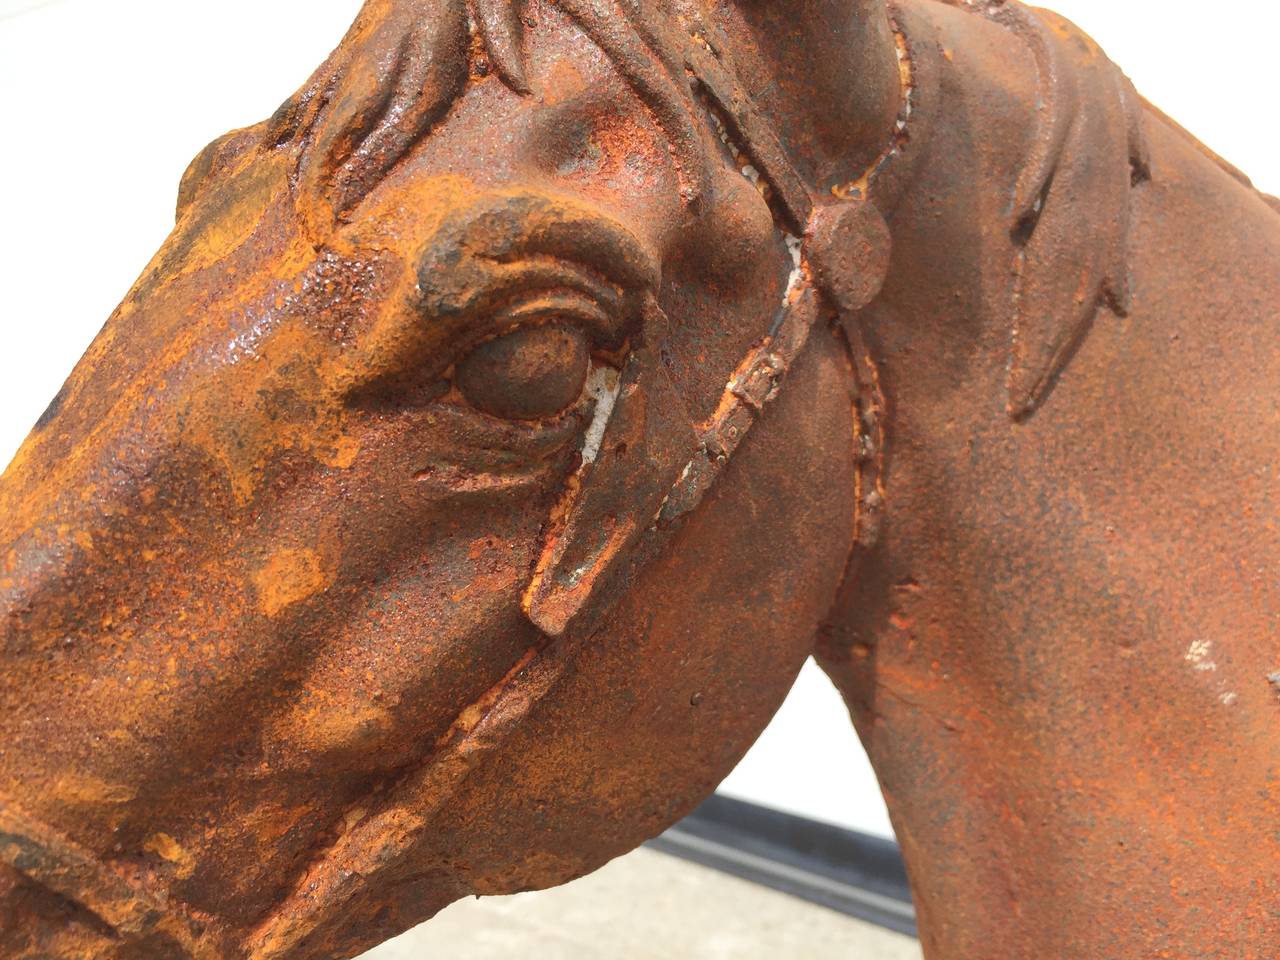 1980s Realism Cast Iron Sculpture of a Horse's Head and Nape For Sale 1